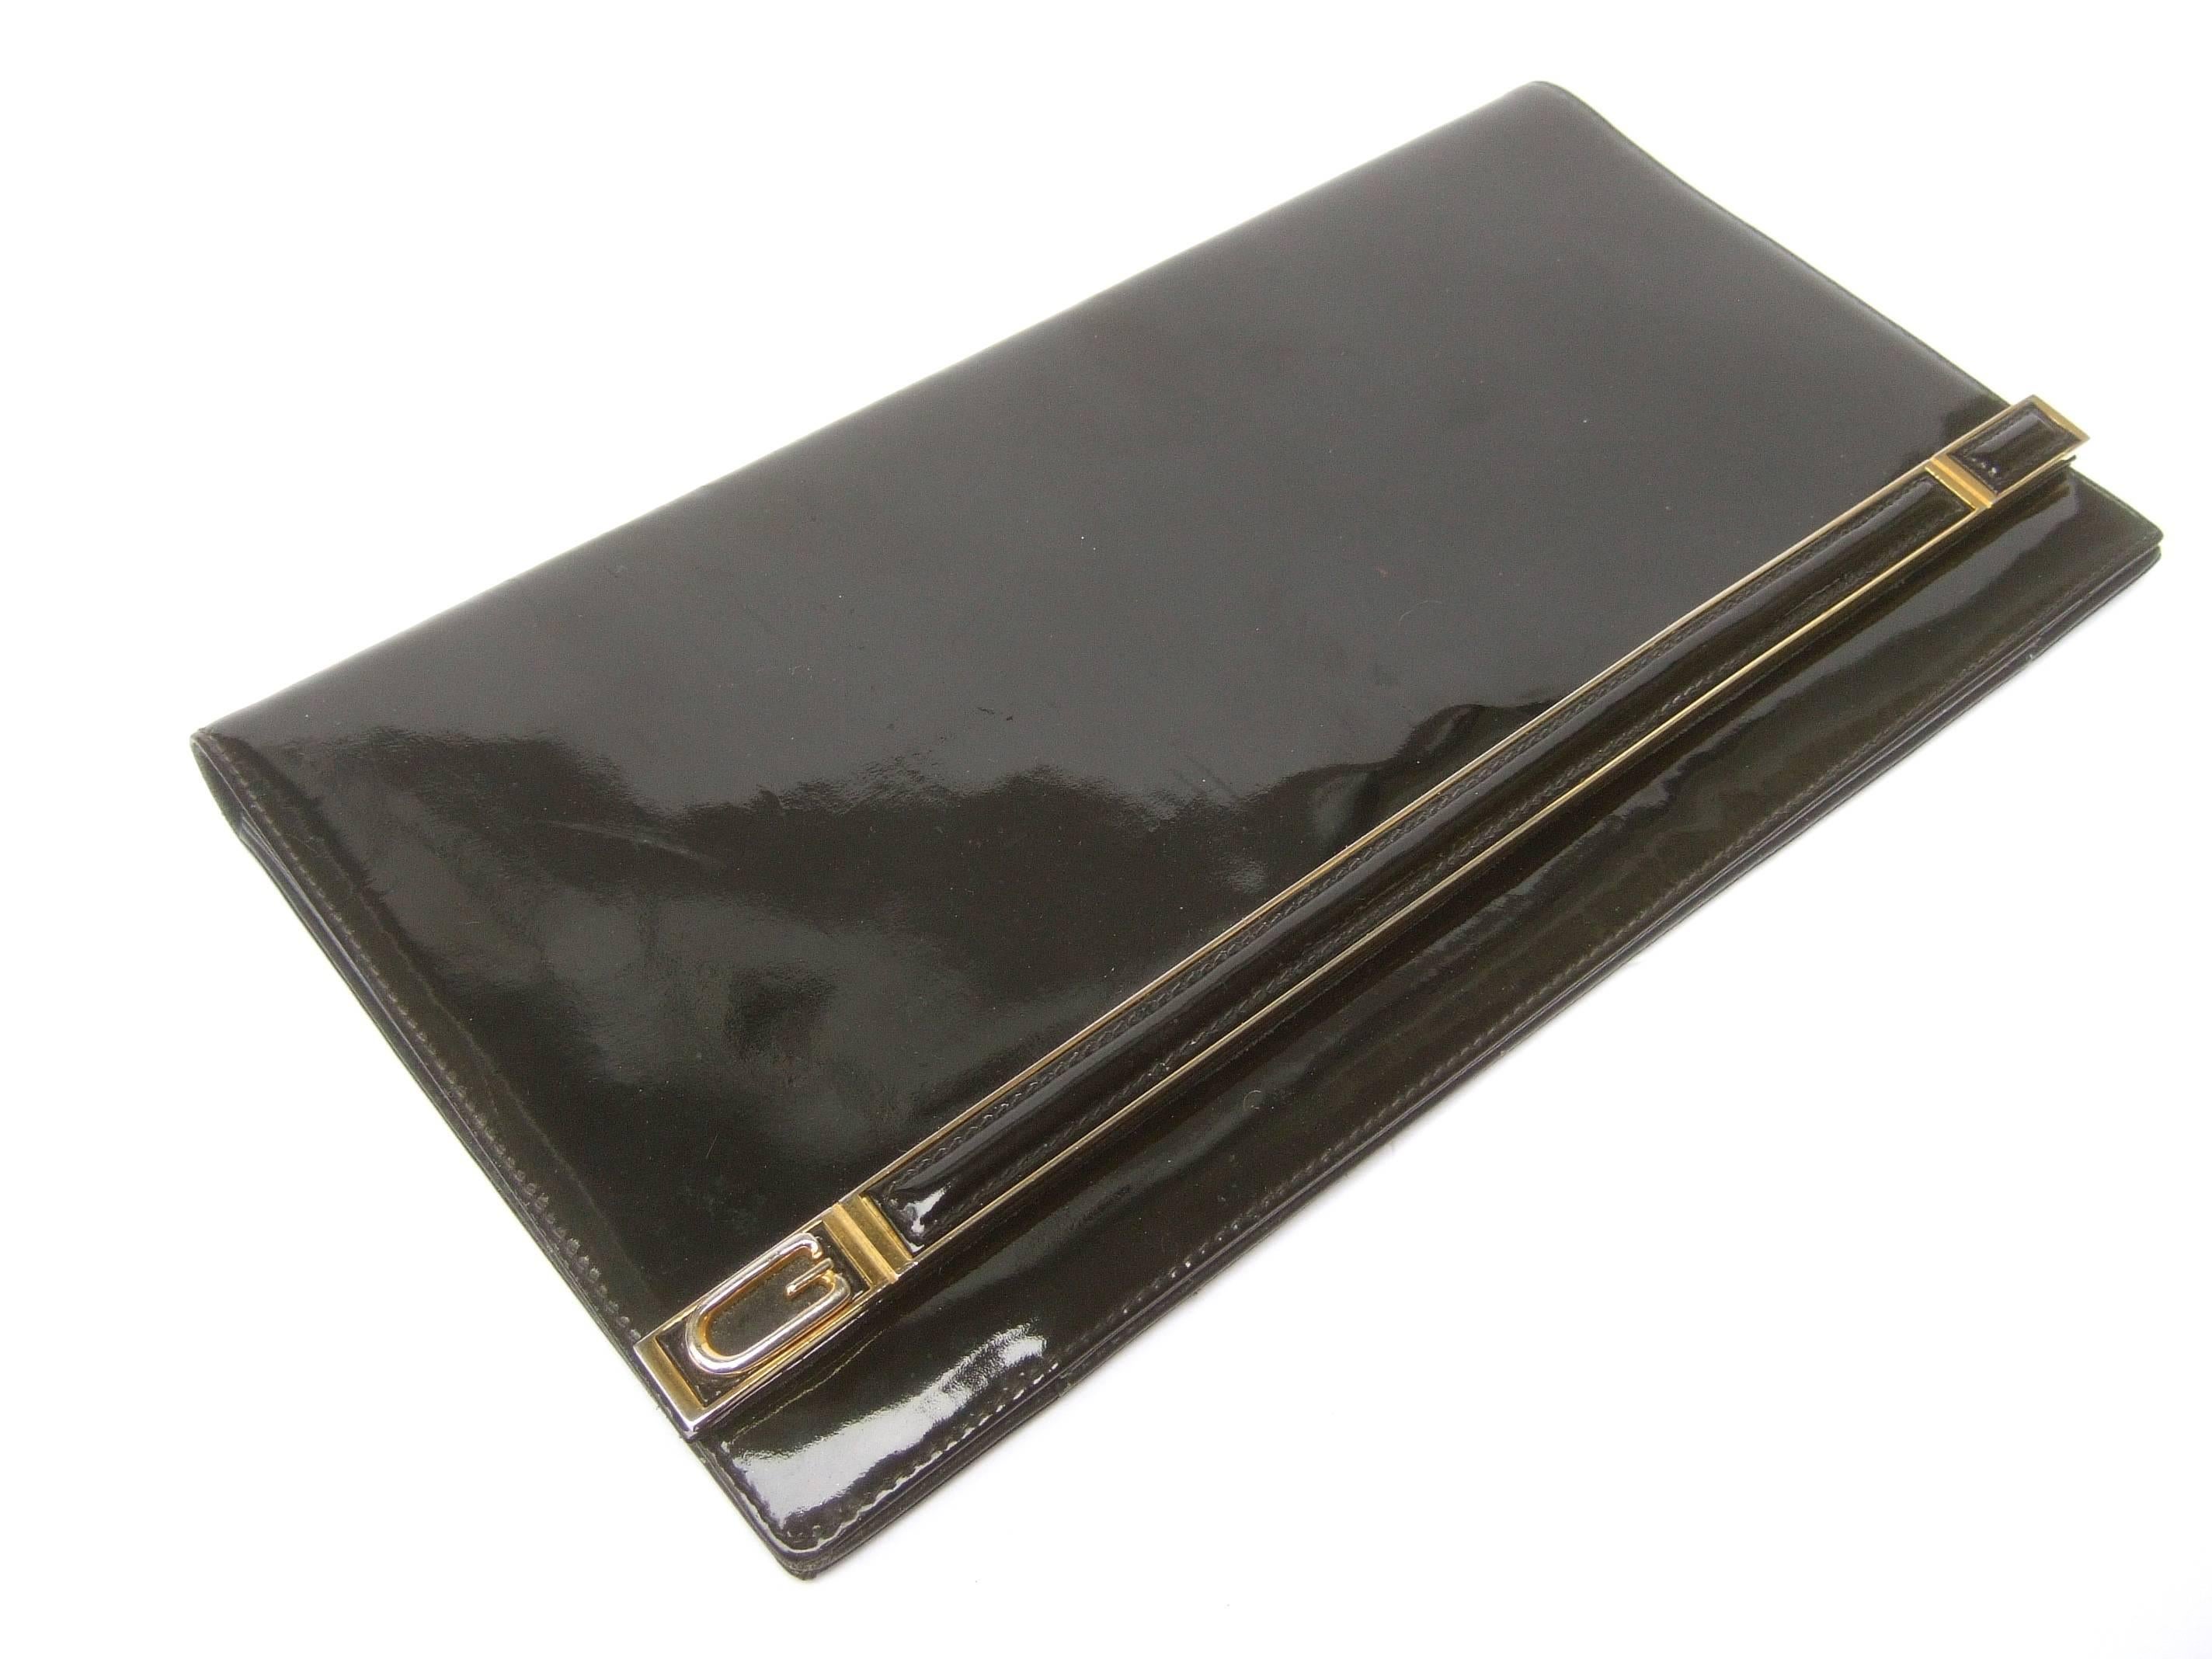 Gucci Sleek black patent leather clutch bag c 1970s
The stylish Italian glossy patent leather elongated
clutch bag is adorned with Gucci's G initial on one
of the corners

Running across the lower front flap cover is a matching
black patent leather